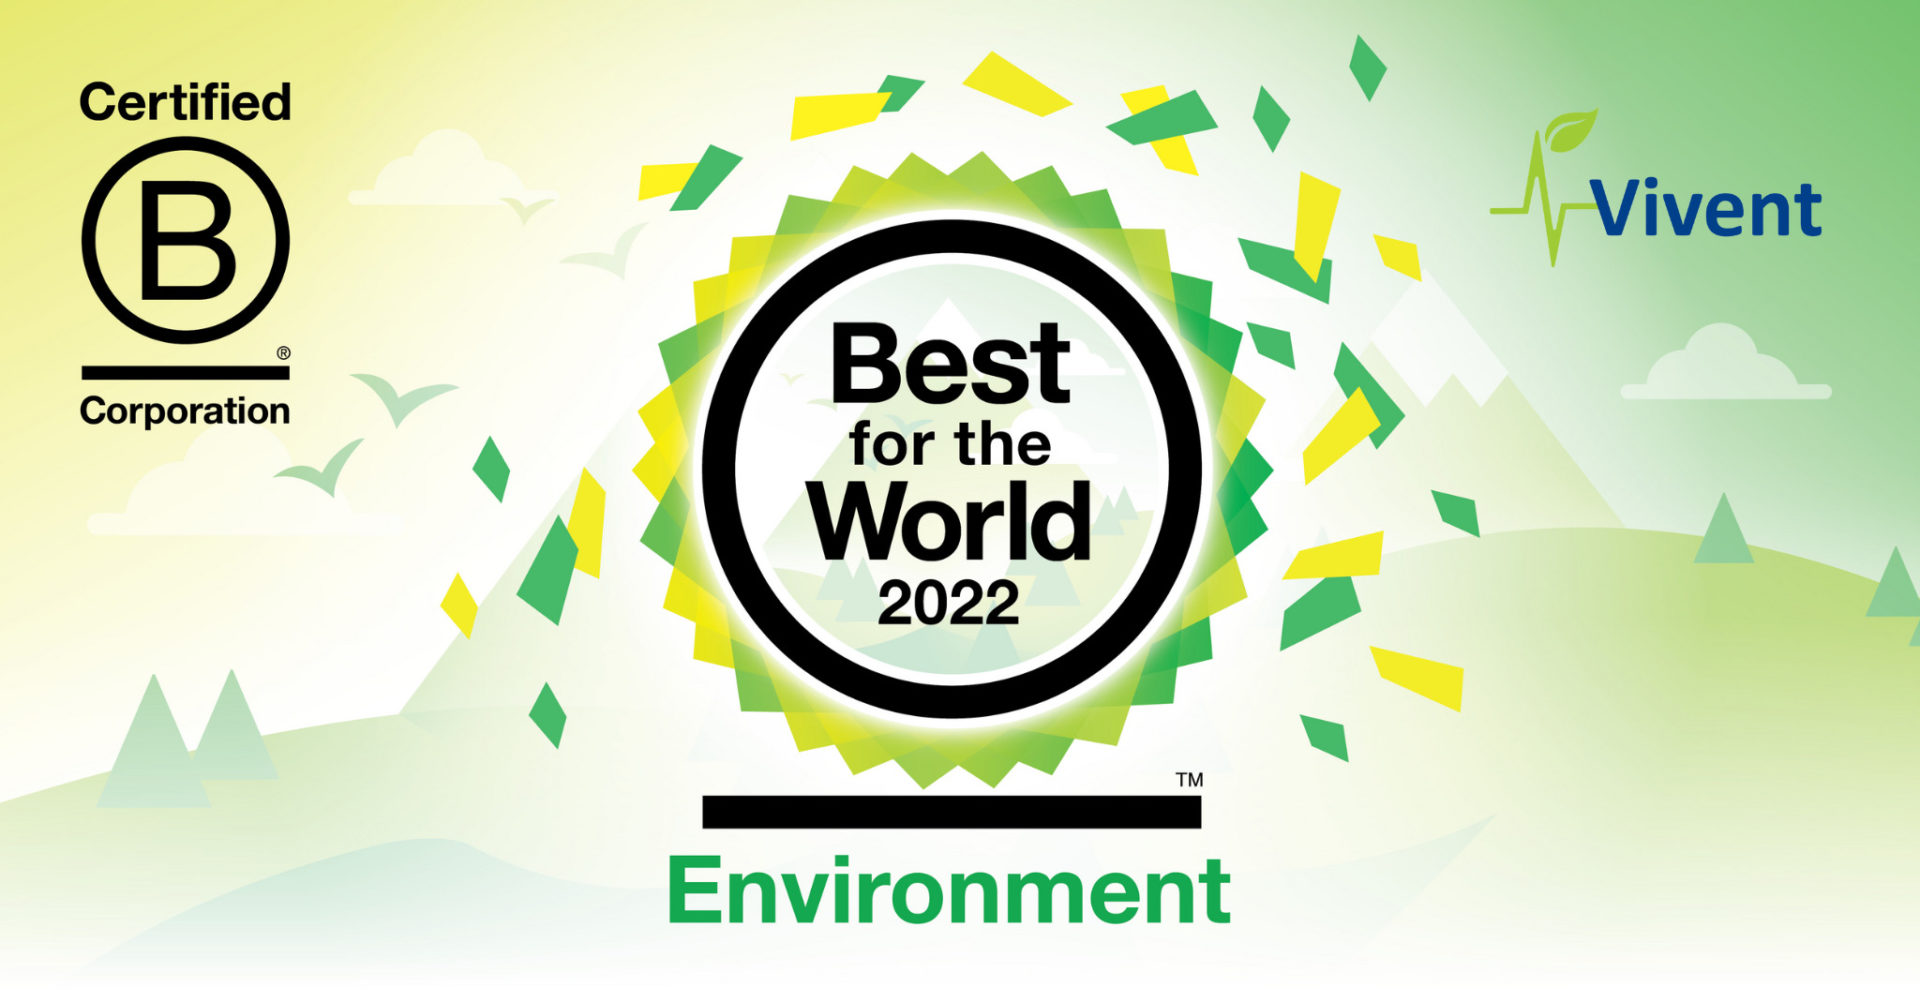 Vivent recognized as a 2022 Best For The World for exceptional impact on its environment